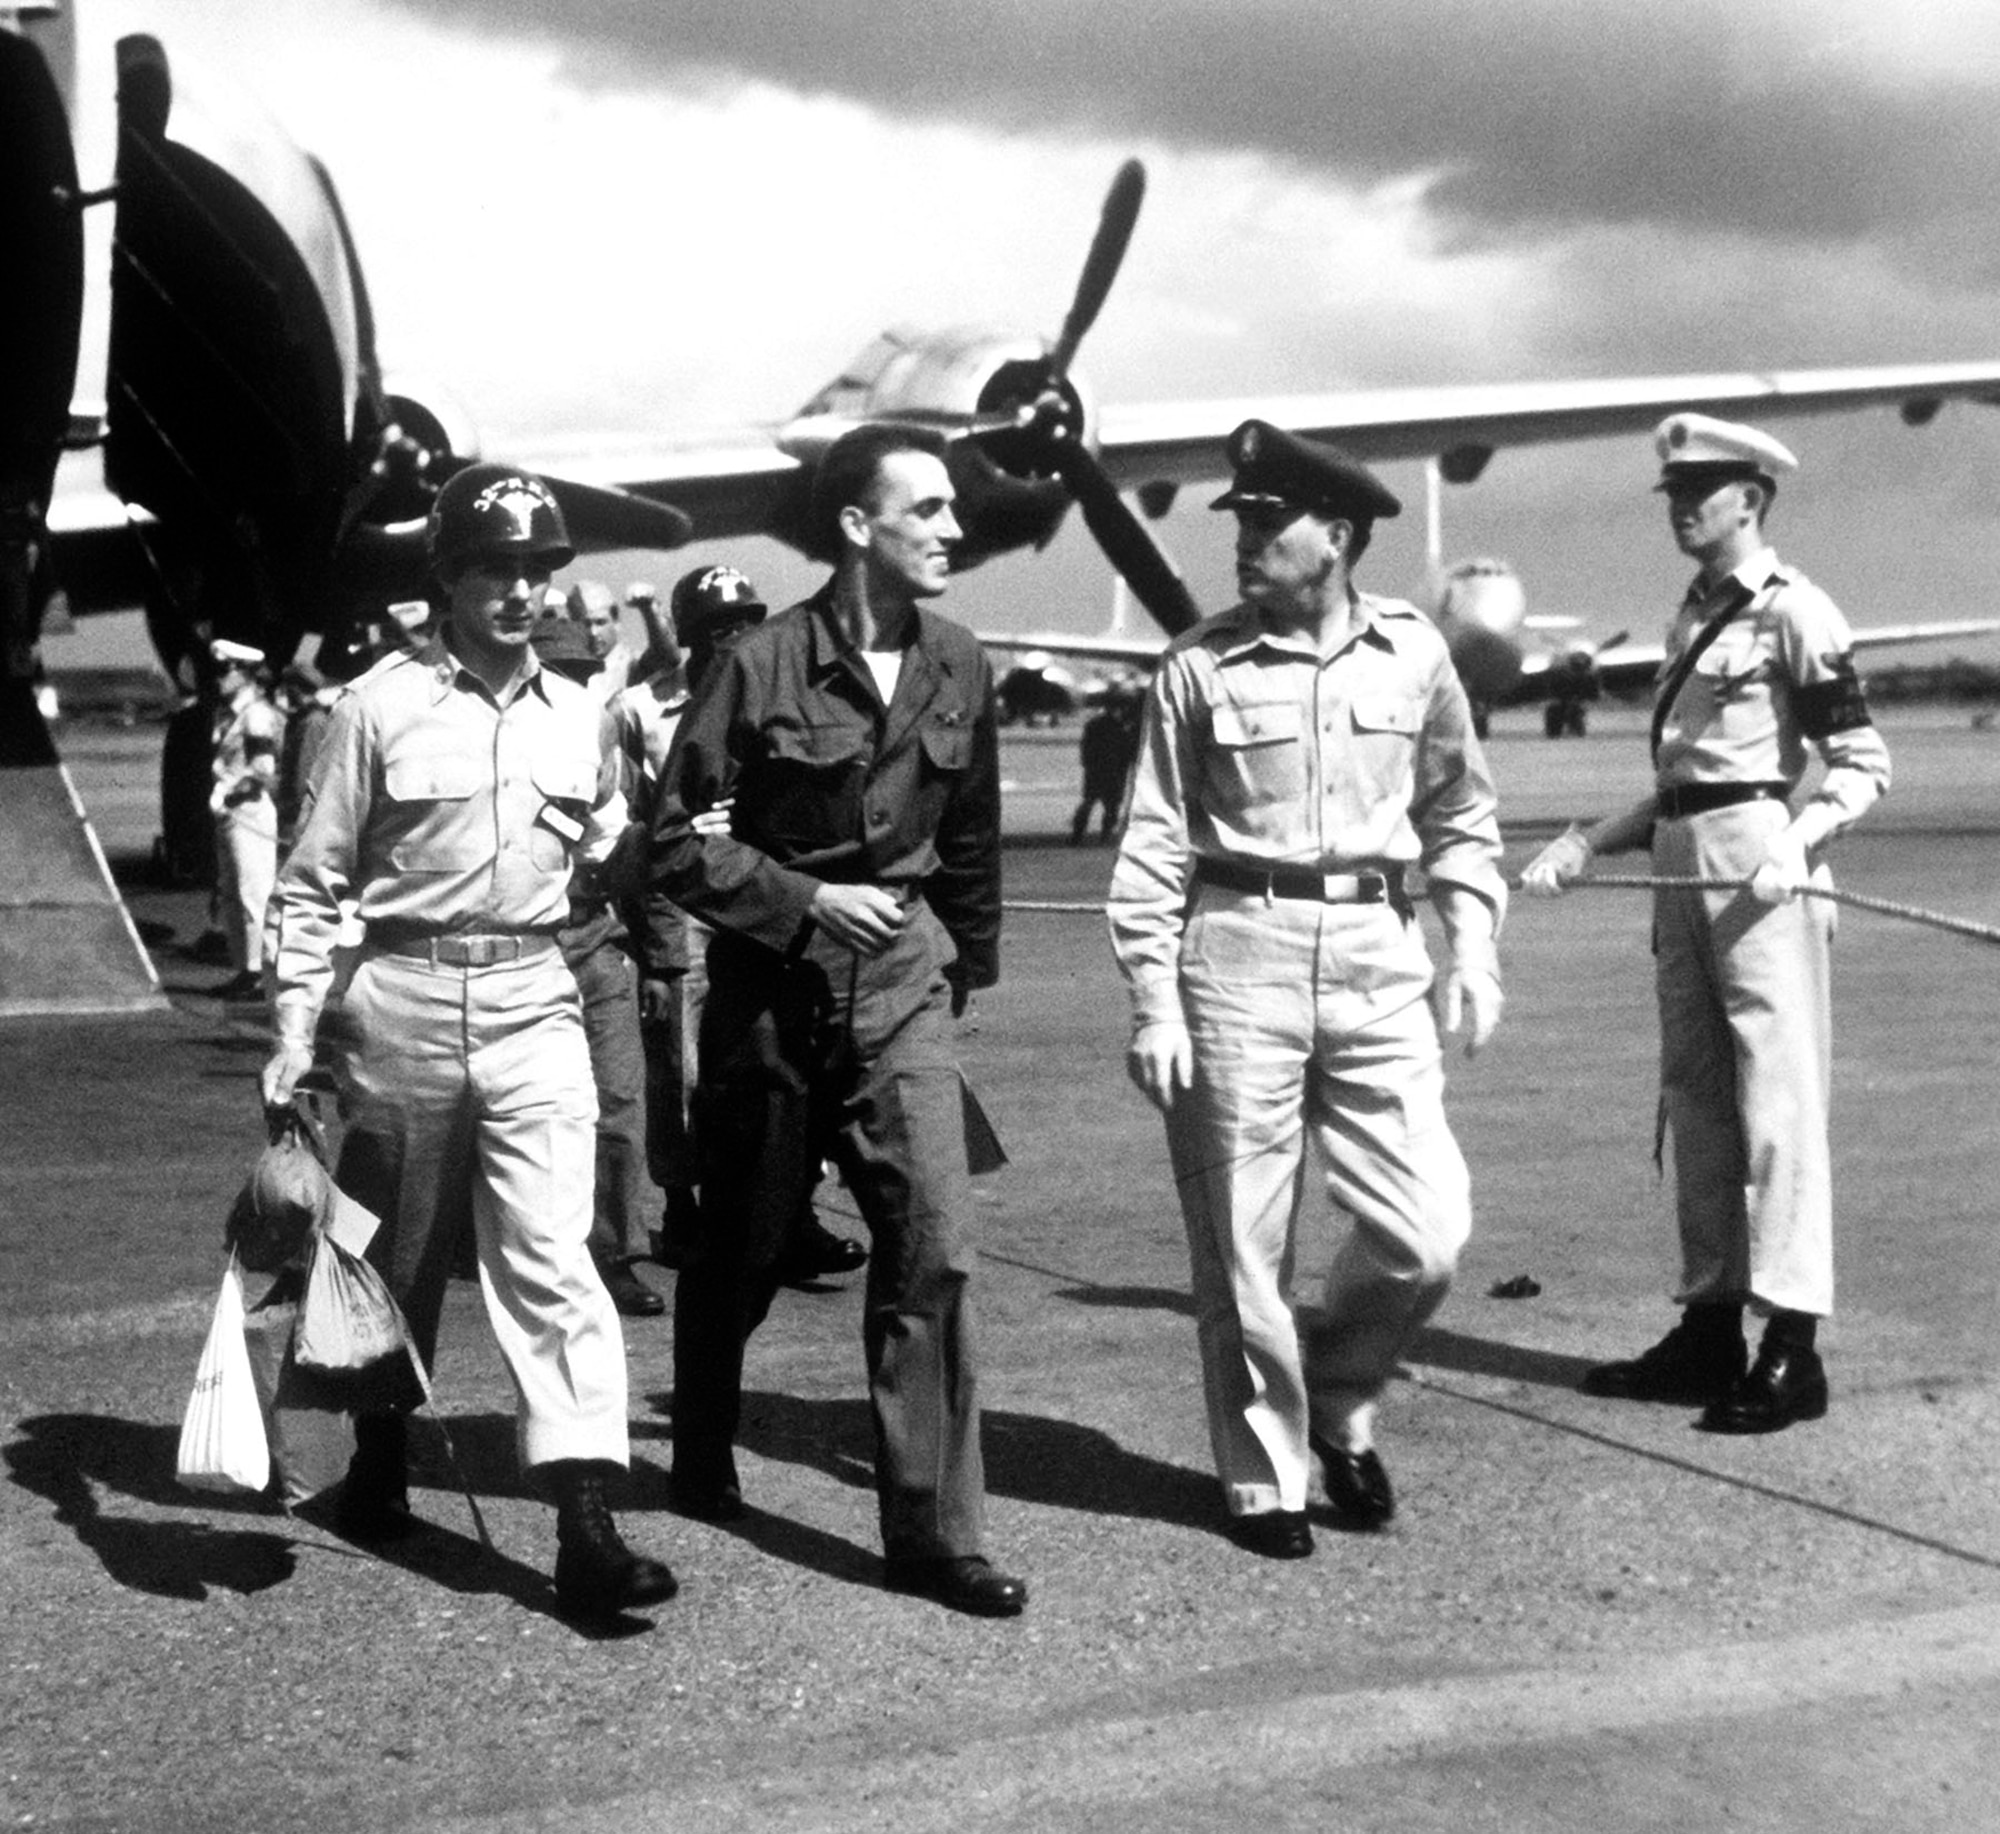 One of the first Air Force POWs to return to Japan in Operation Big Switch was Staff Sgt. Robert M. Wilkins (center). He is shown arriving in Japan after the 4-and-a-half hour flight from Korea, Aug. 18, 1953.  (U.S. Air Force photo)